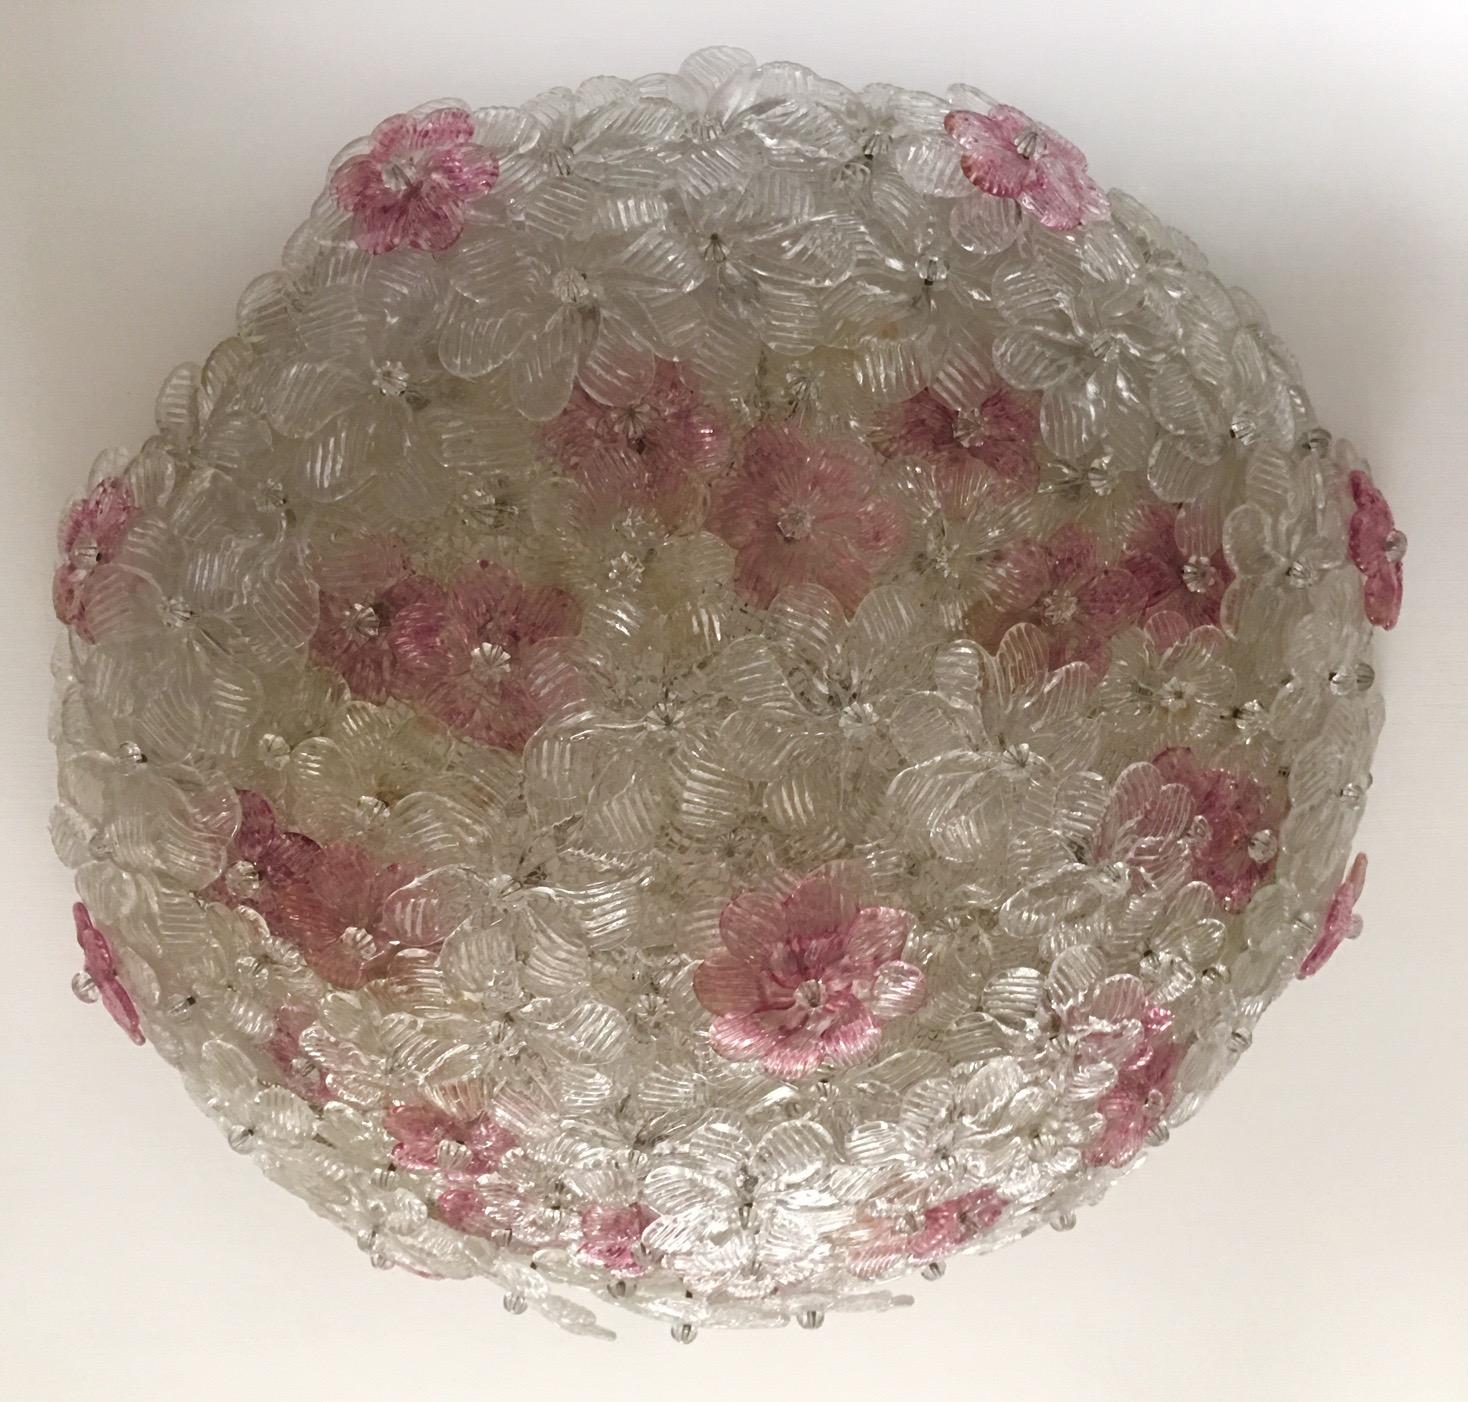 Barovier & Toso Venetian glass flowers basket ceiling.
The ceiling lamp is made of dozens of small roses in precious Murano glass.
Measures: Diameter 62 cm
Height 20 cm.